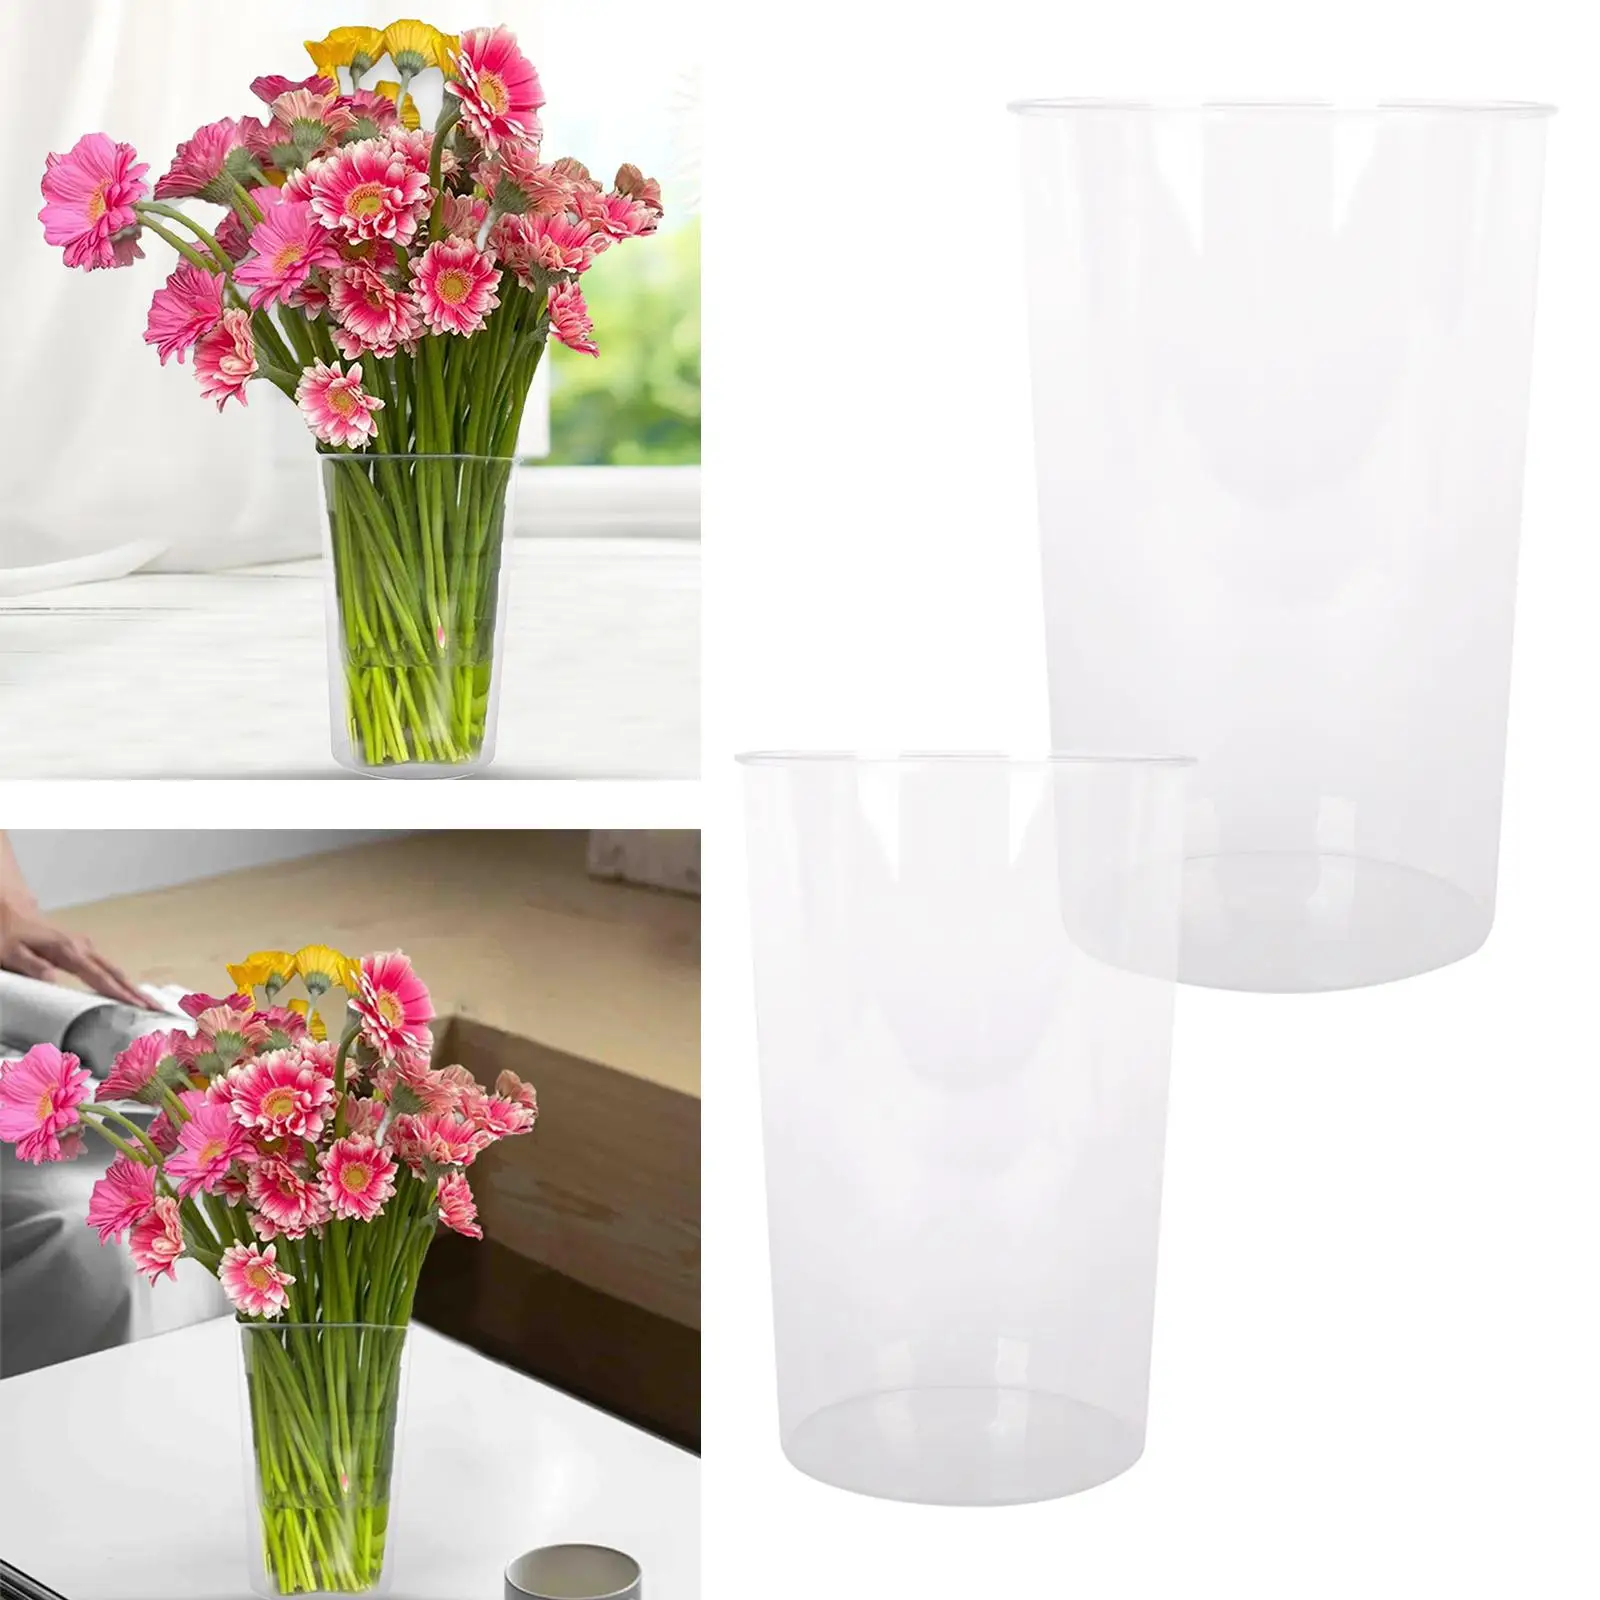 Acrylic Flower Vase Round Aesthetic Lightweight Classy Hydroponic Plant Container for Living Room Apartment Anniversary Desk